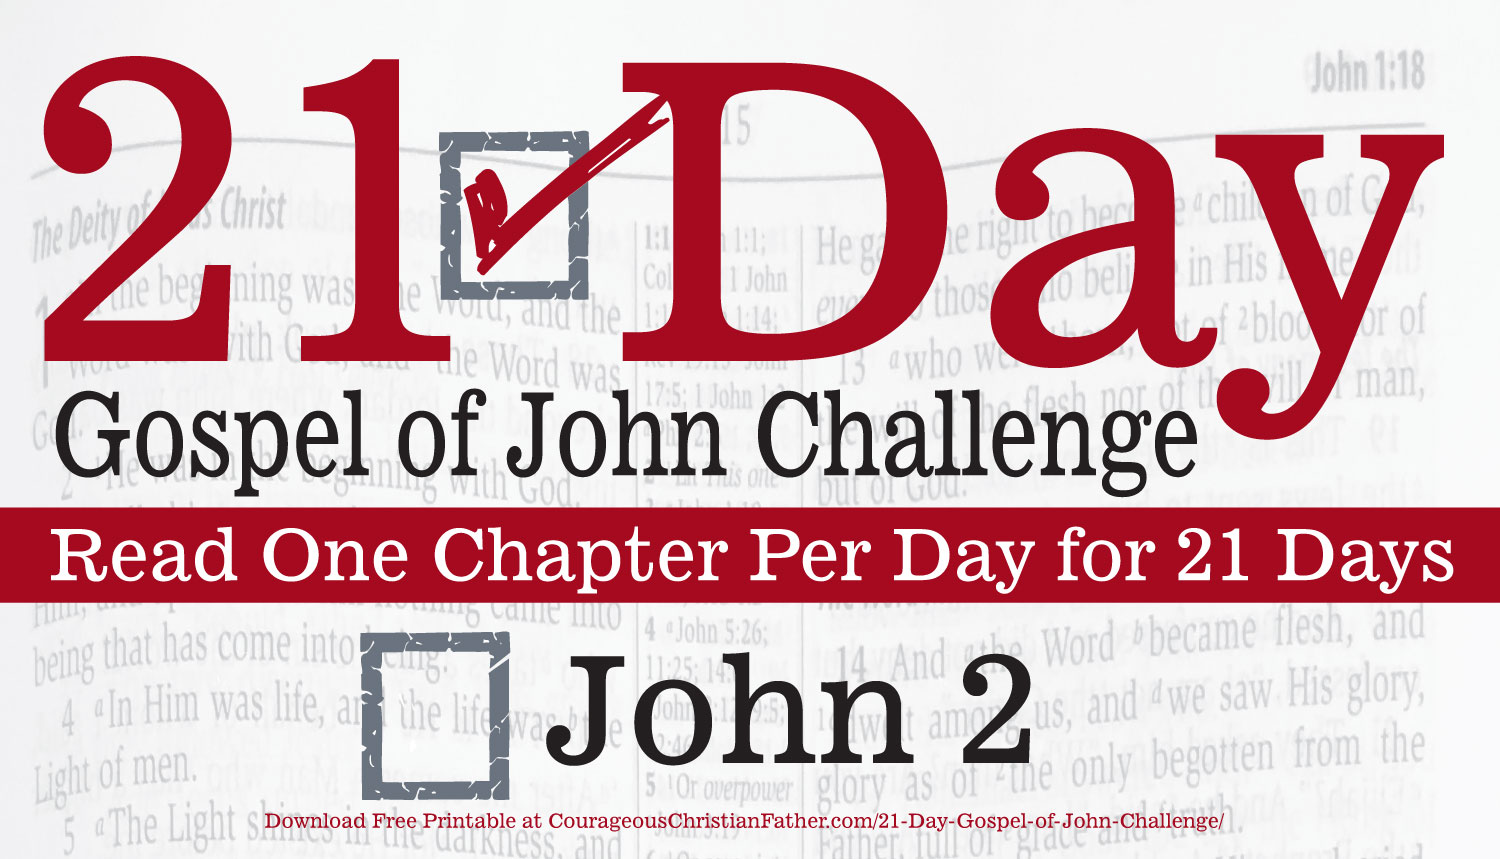 John 2. Today is day two of the 21 day Gospel of John challenge. Read chapter 2 of the Gospel of John. In this blog post I talk about that second chapter. #John2